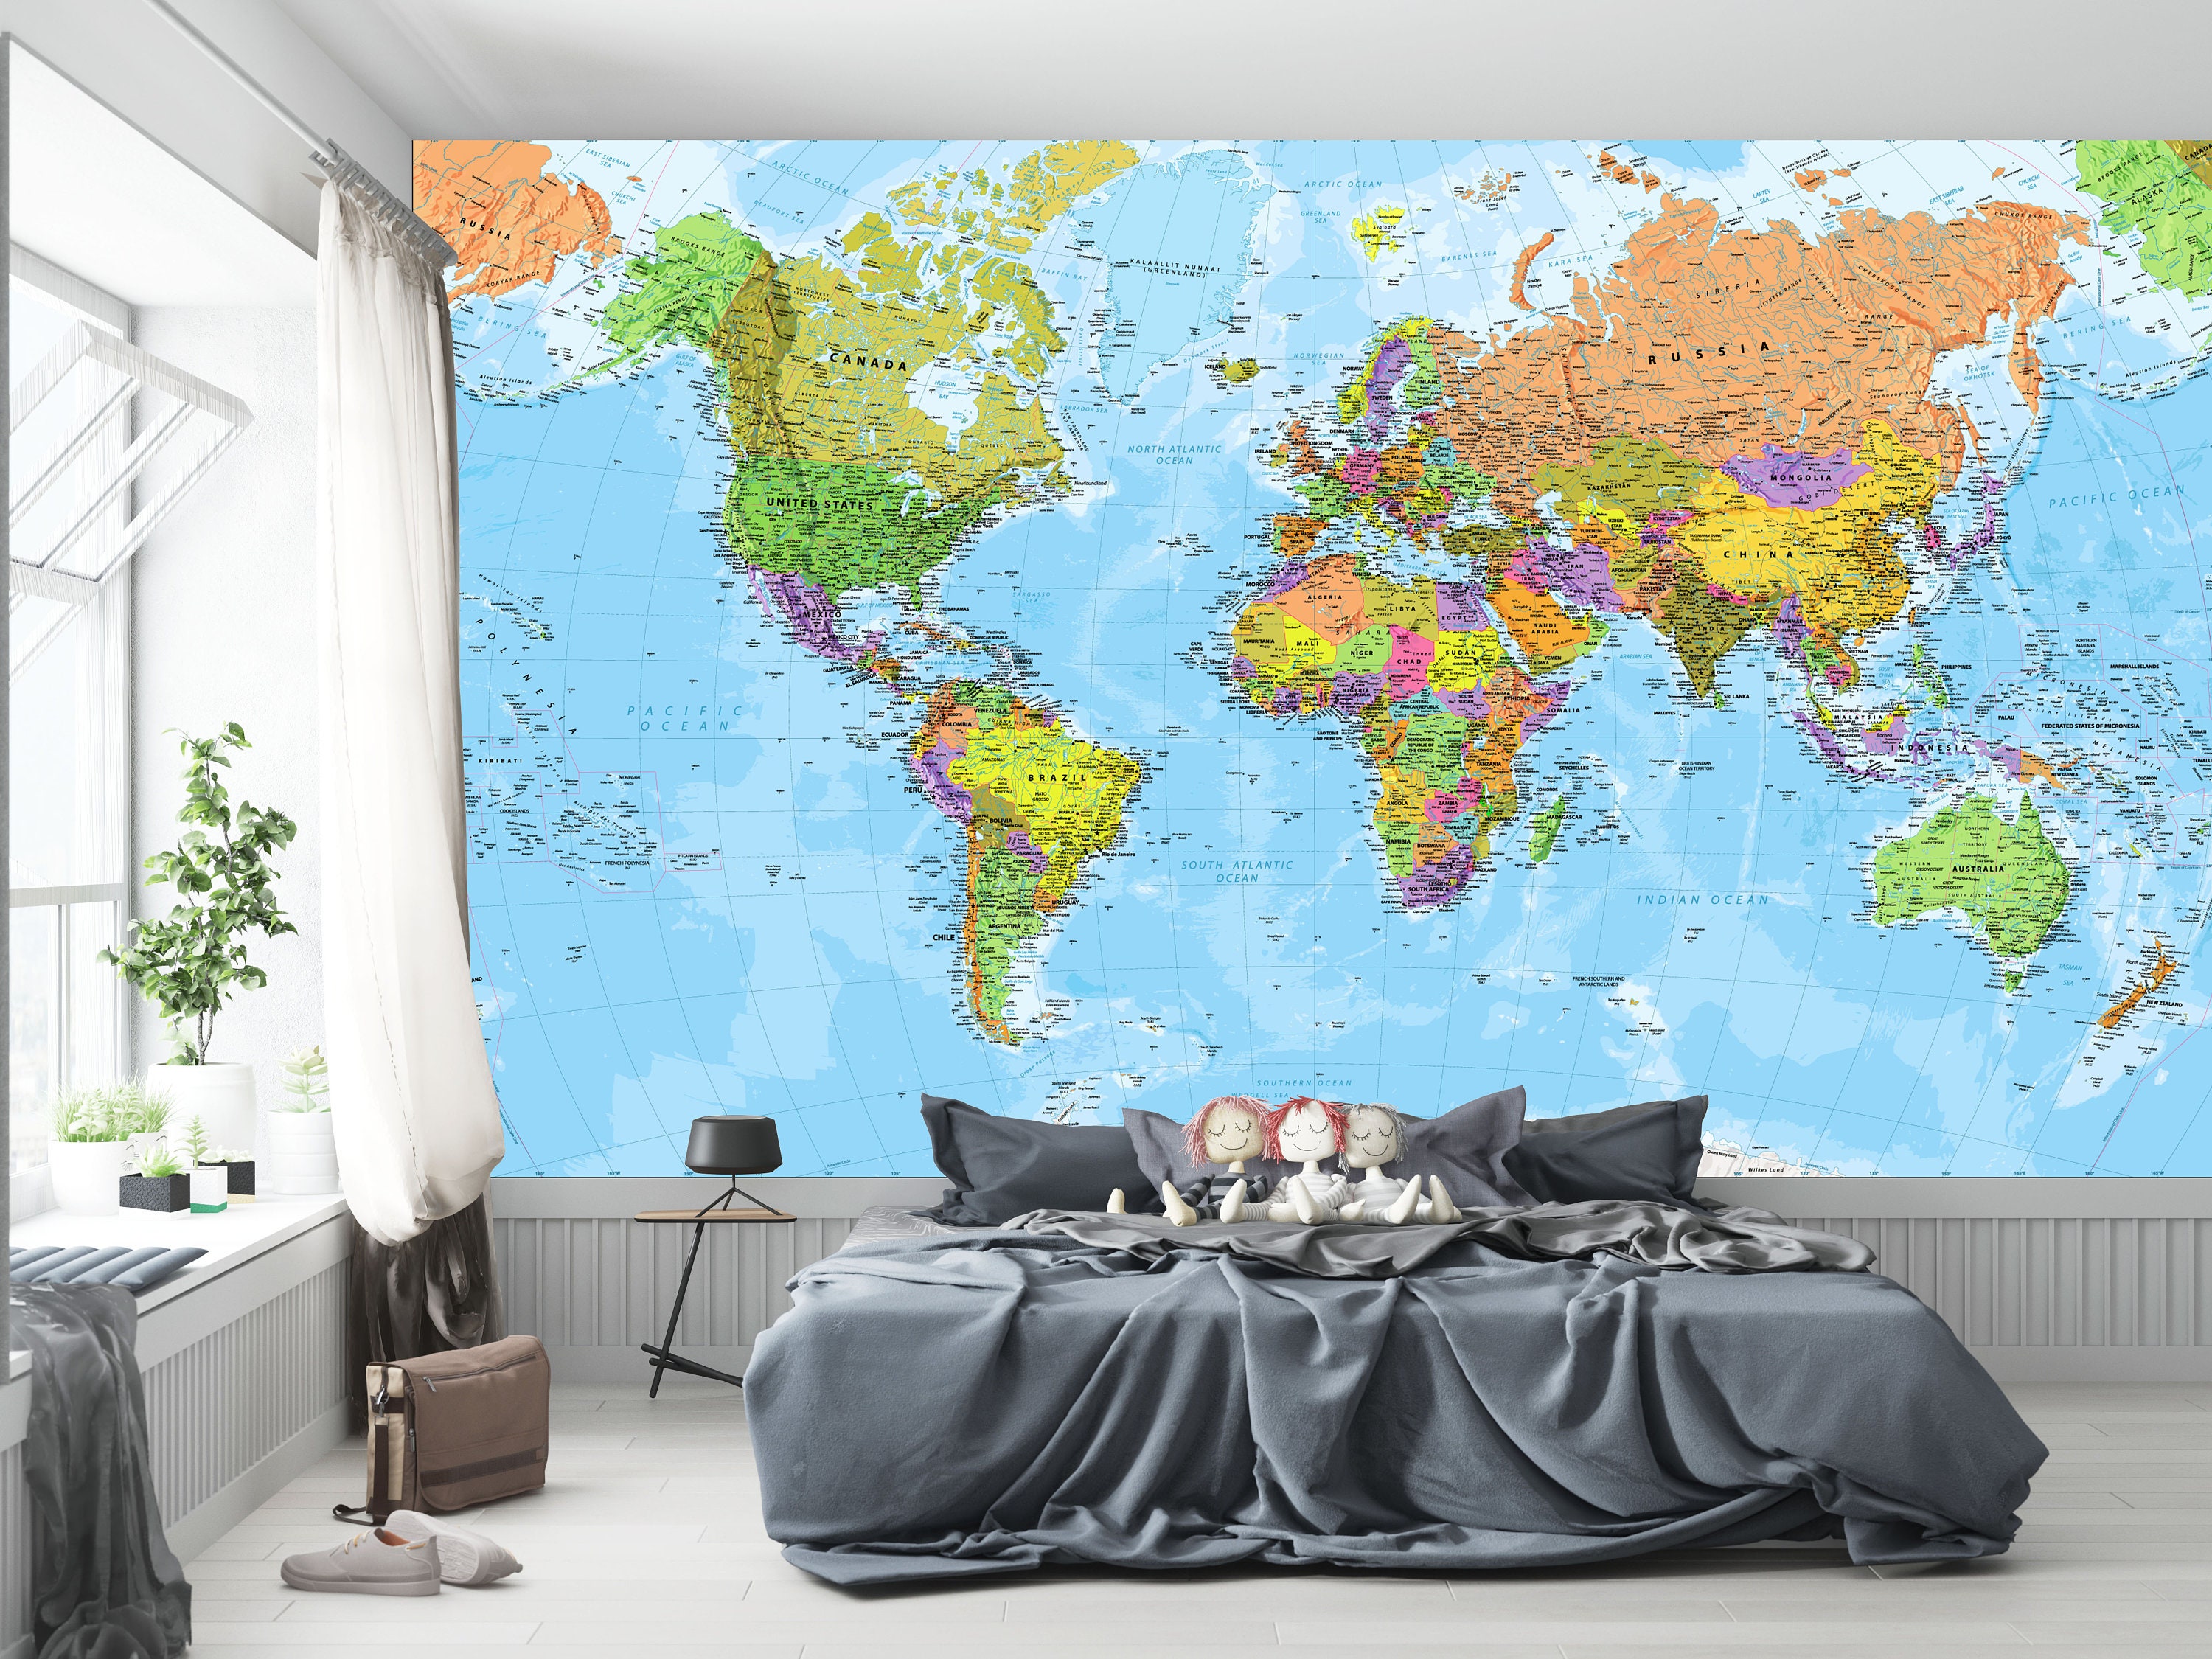 World map Wallpaper photo paper Poster Full HD Without Frame for Living  RoomBedroomOfficeKids RoomHallHome Decor  13X19 Photographic Paper   Maps posters in India  Buy art film design movie music nature